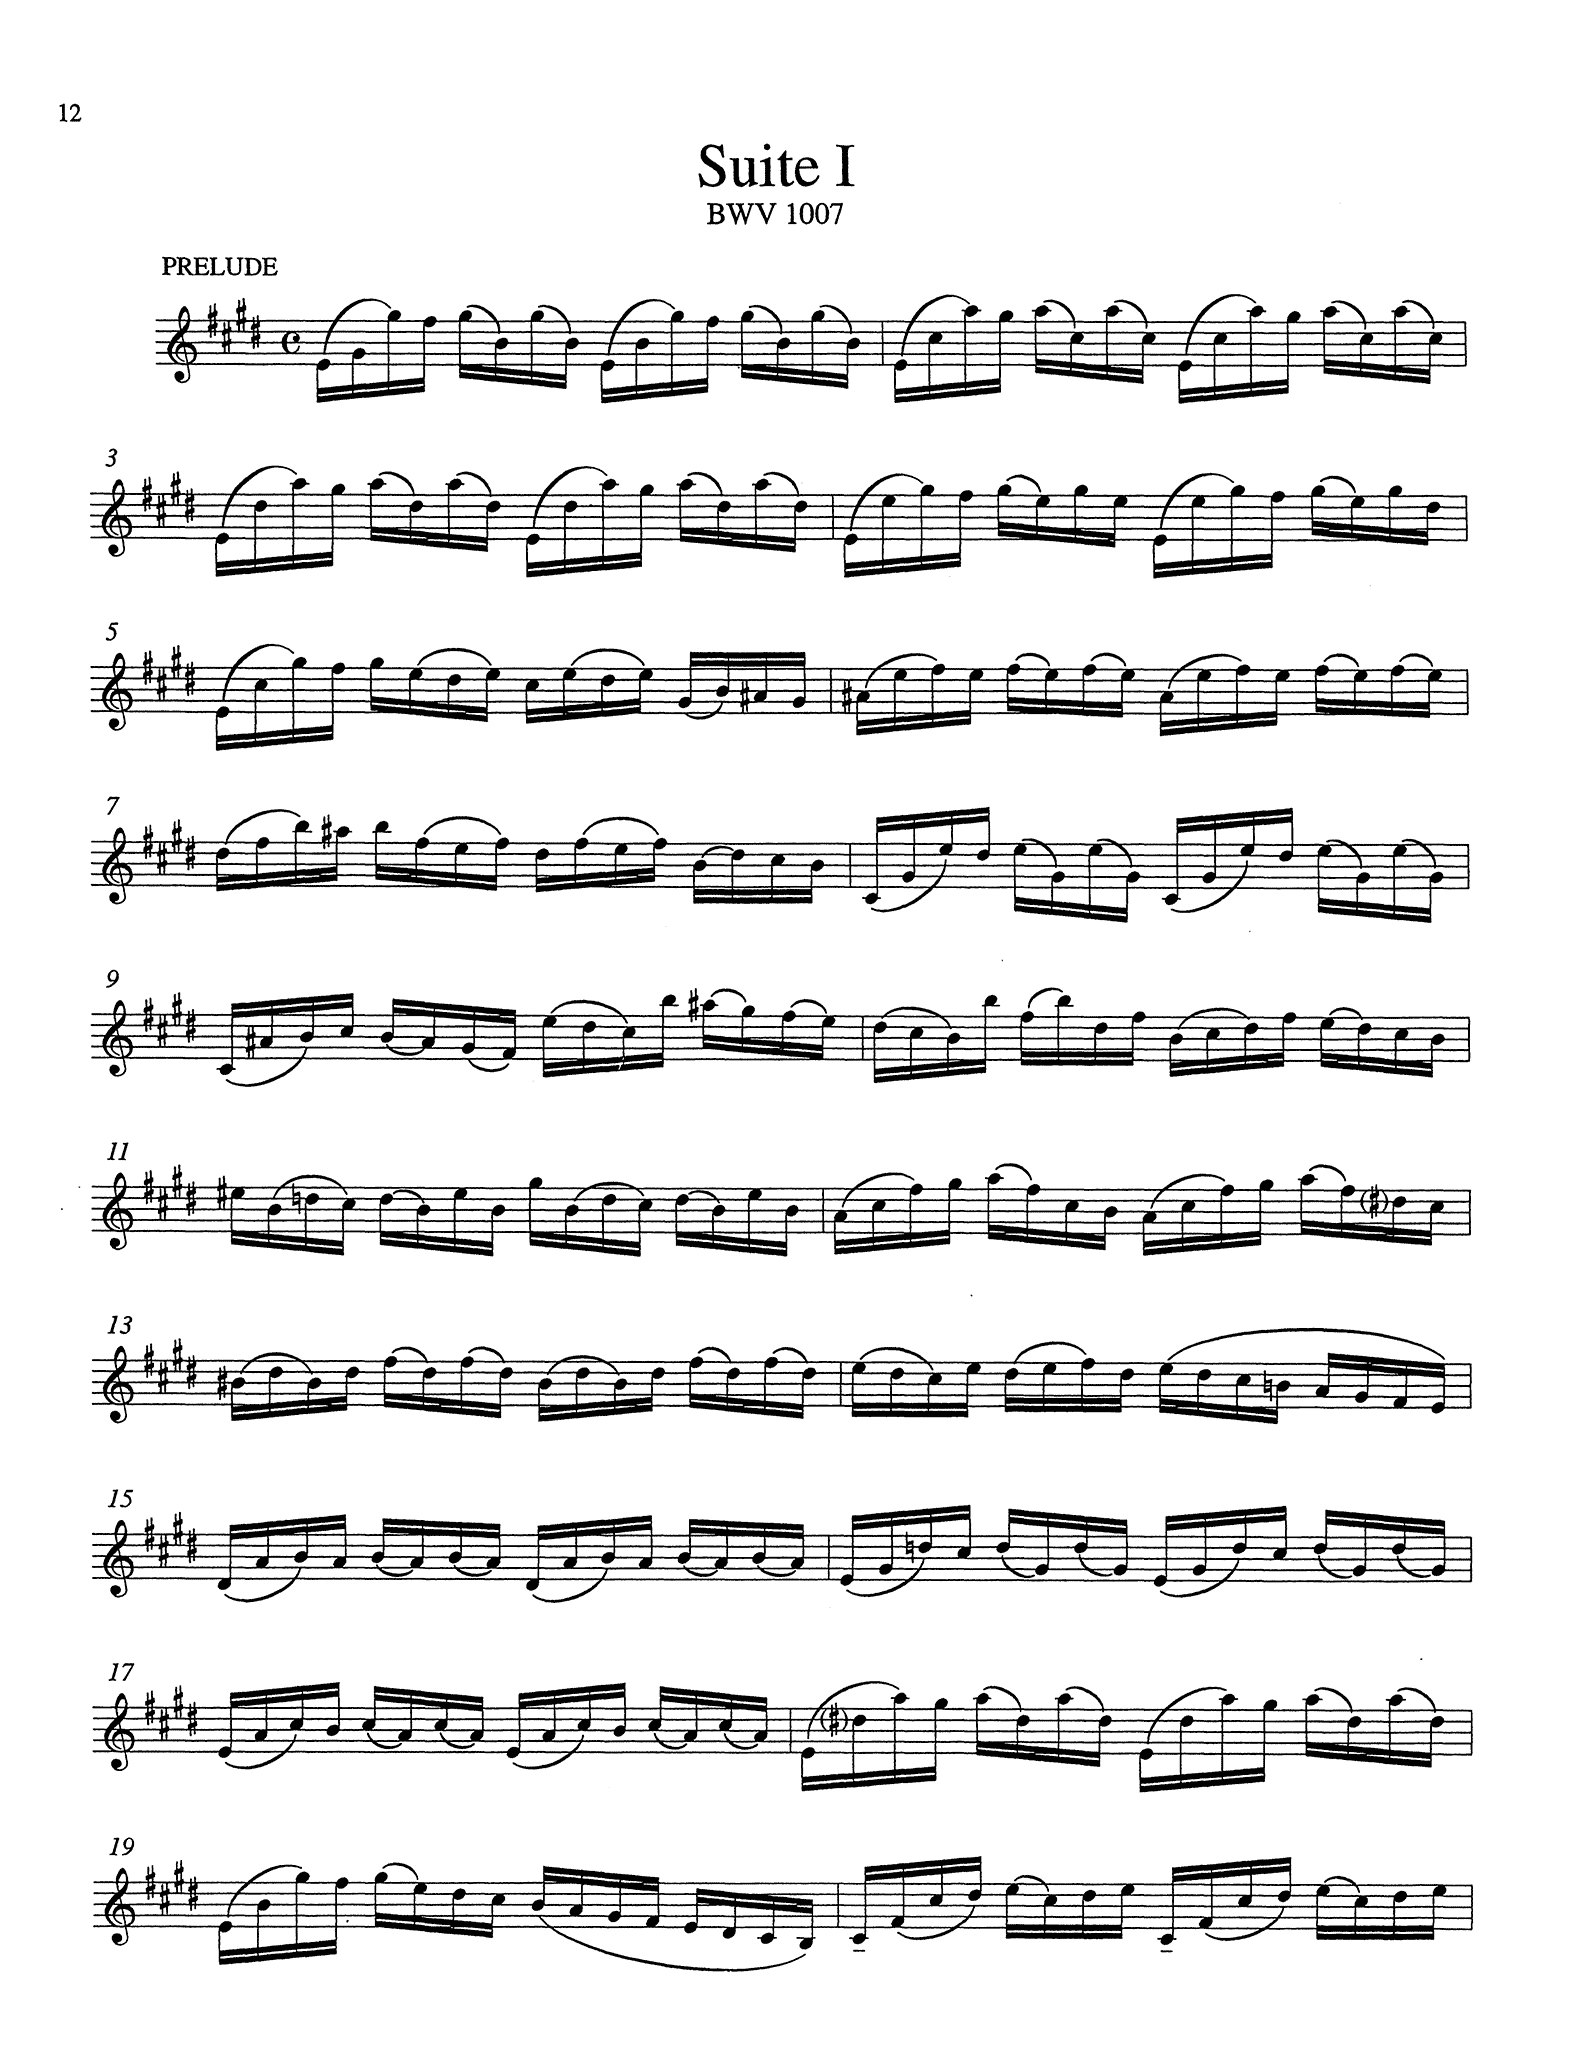 Bach Cello Suite No. 1 BWV 1007 arranged for clarinet